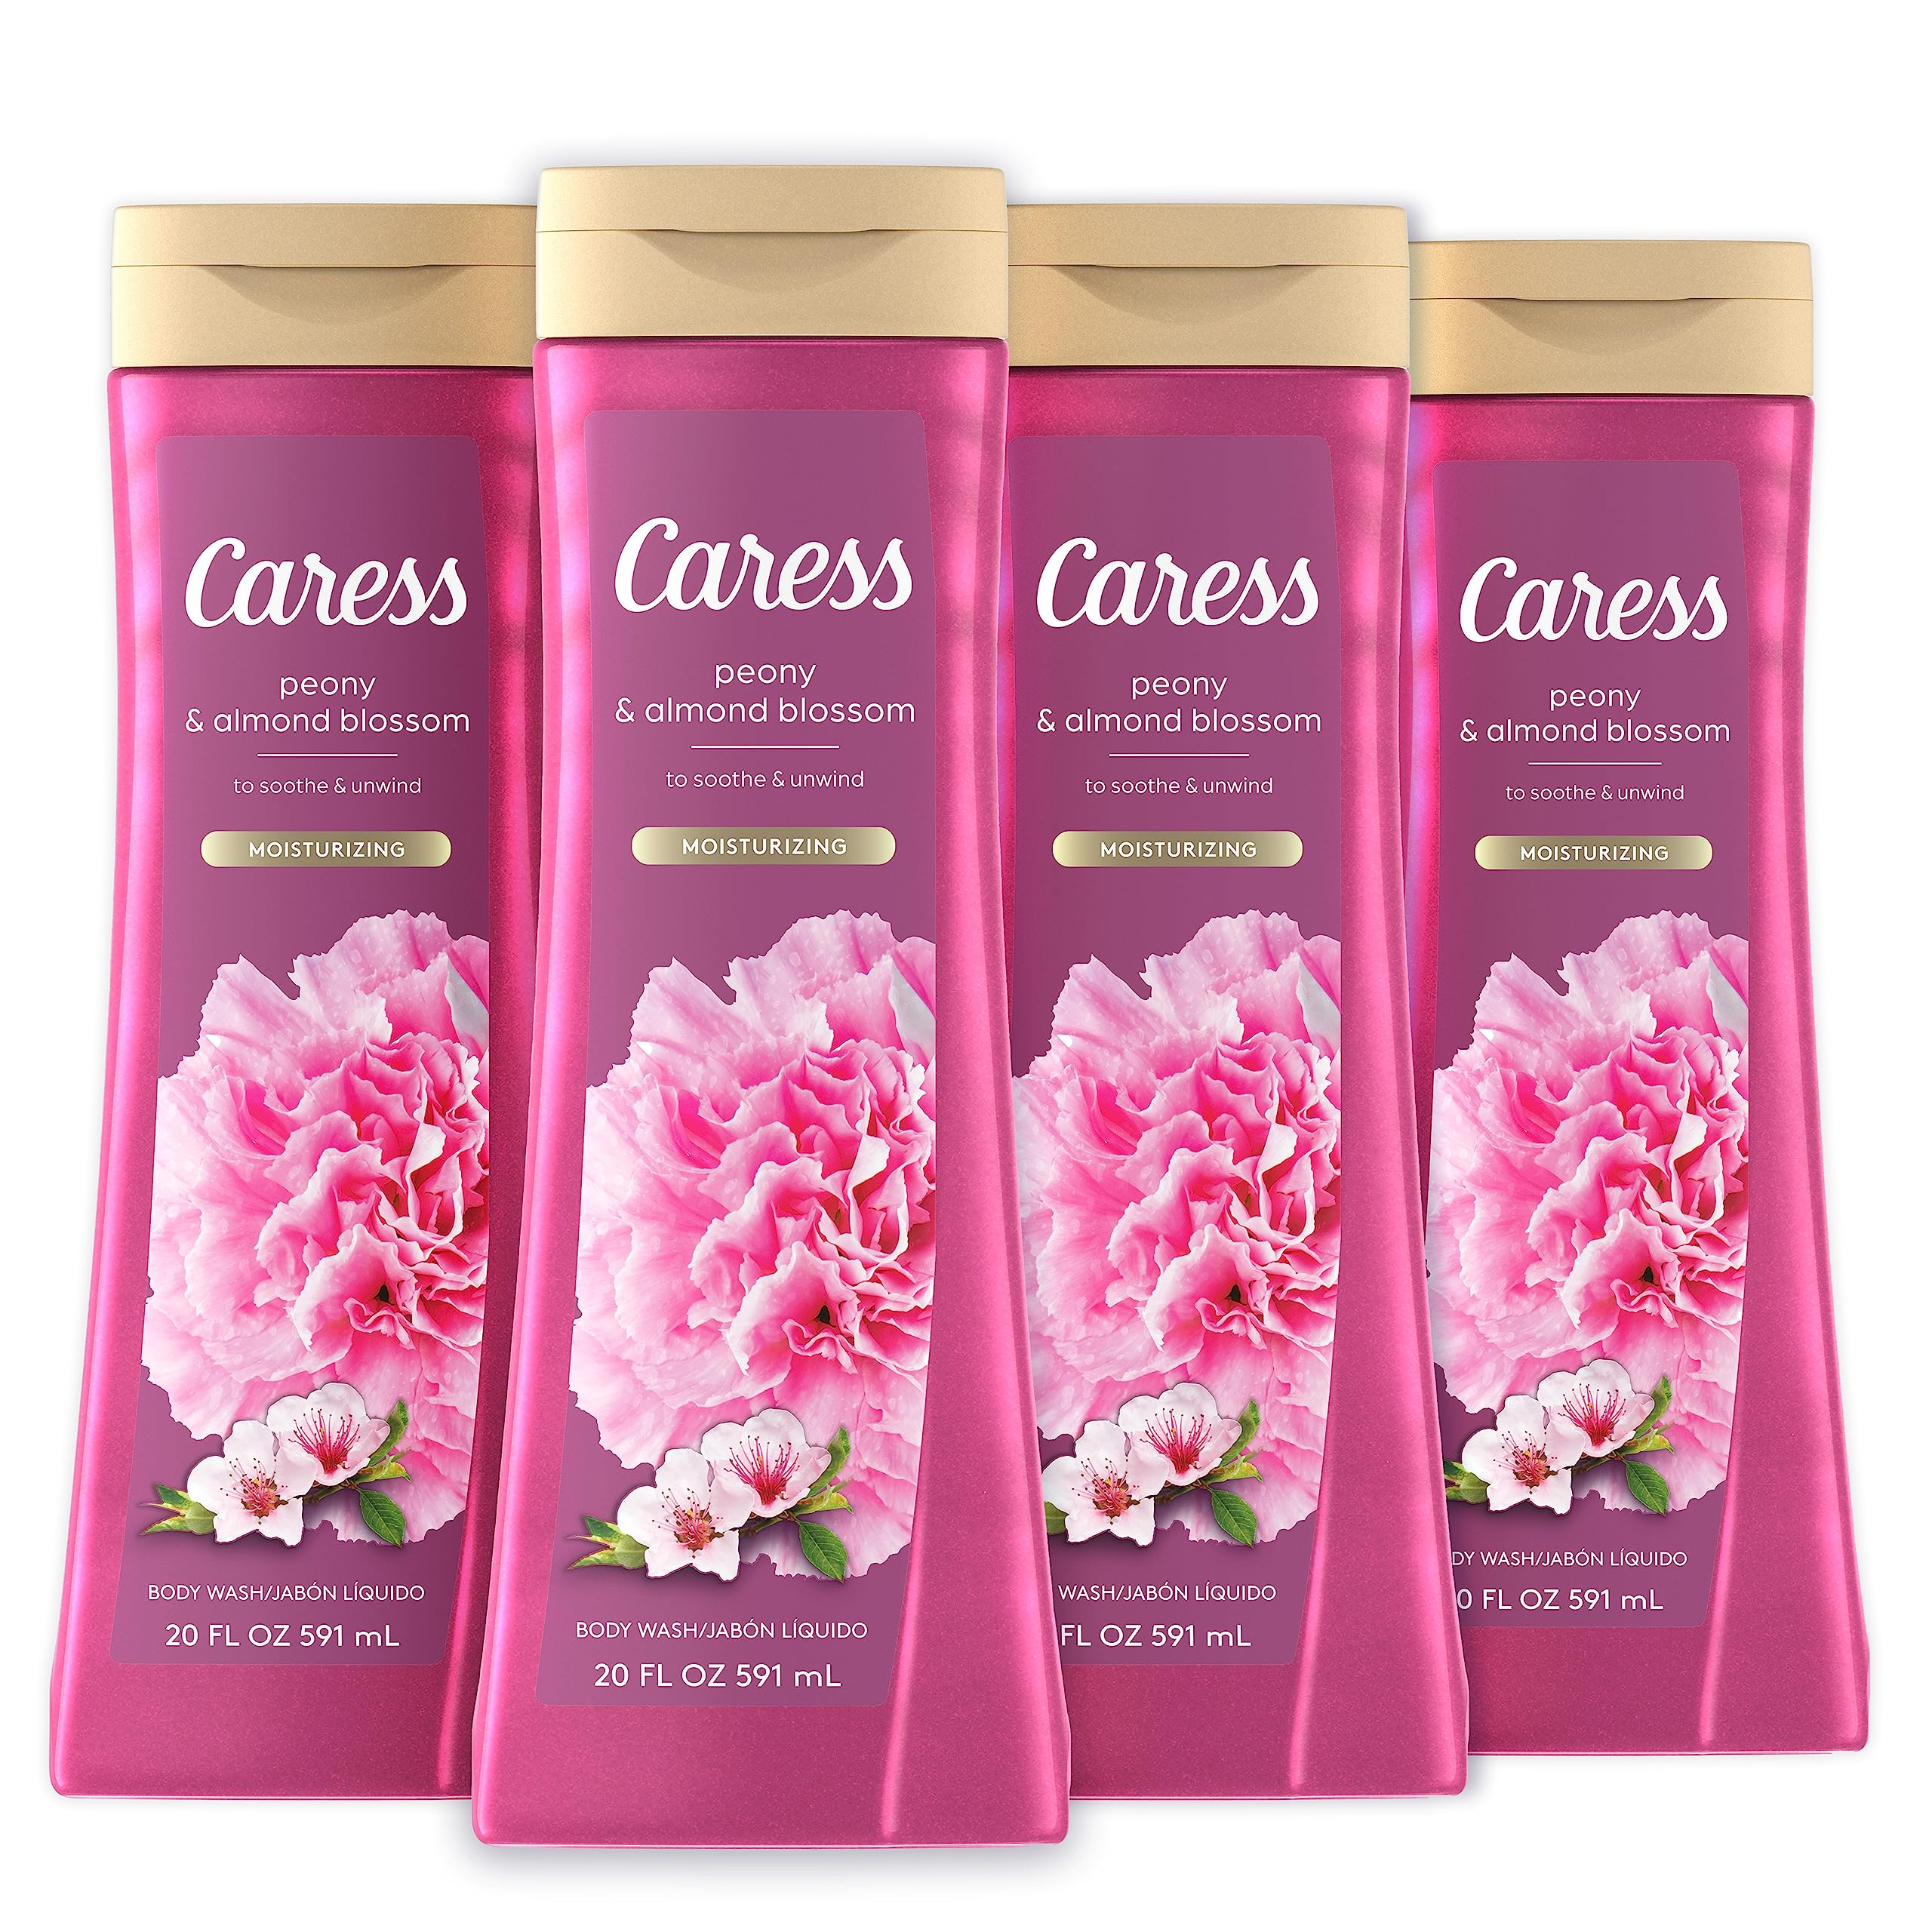 Caress Moisturizing Peony & Almond Blossom Body Wash For Fresh, Smooth Skin Body Soap To Soothe & Unwind 20 fl oz, Pack of 4